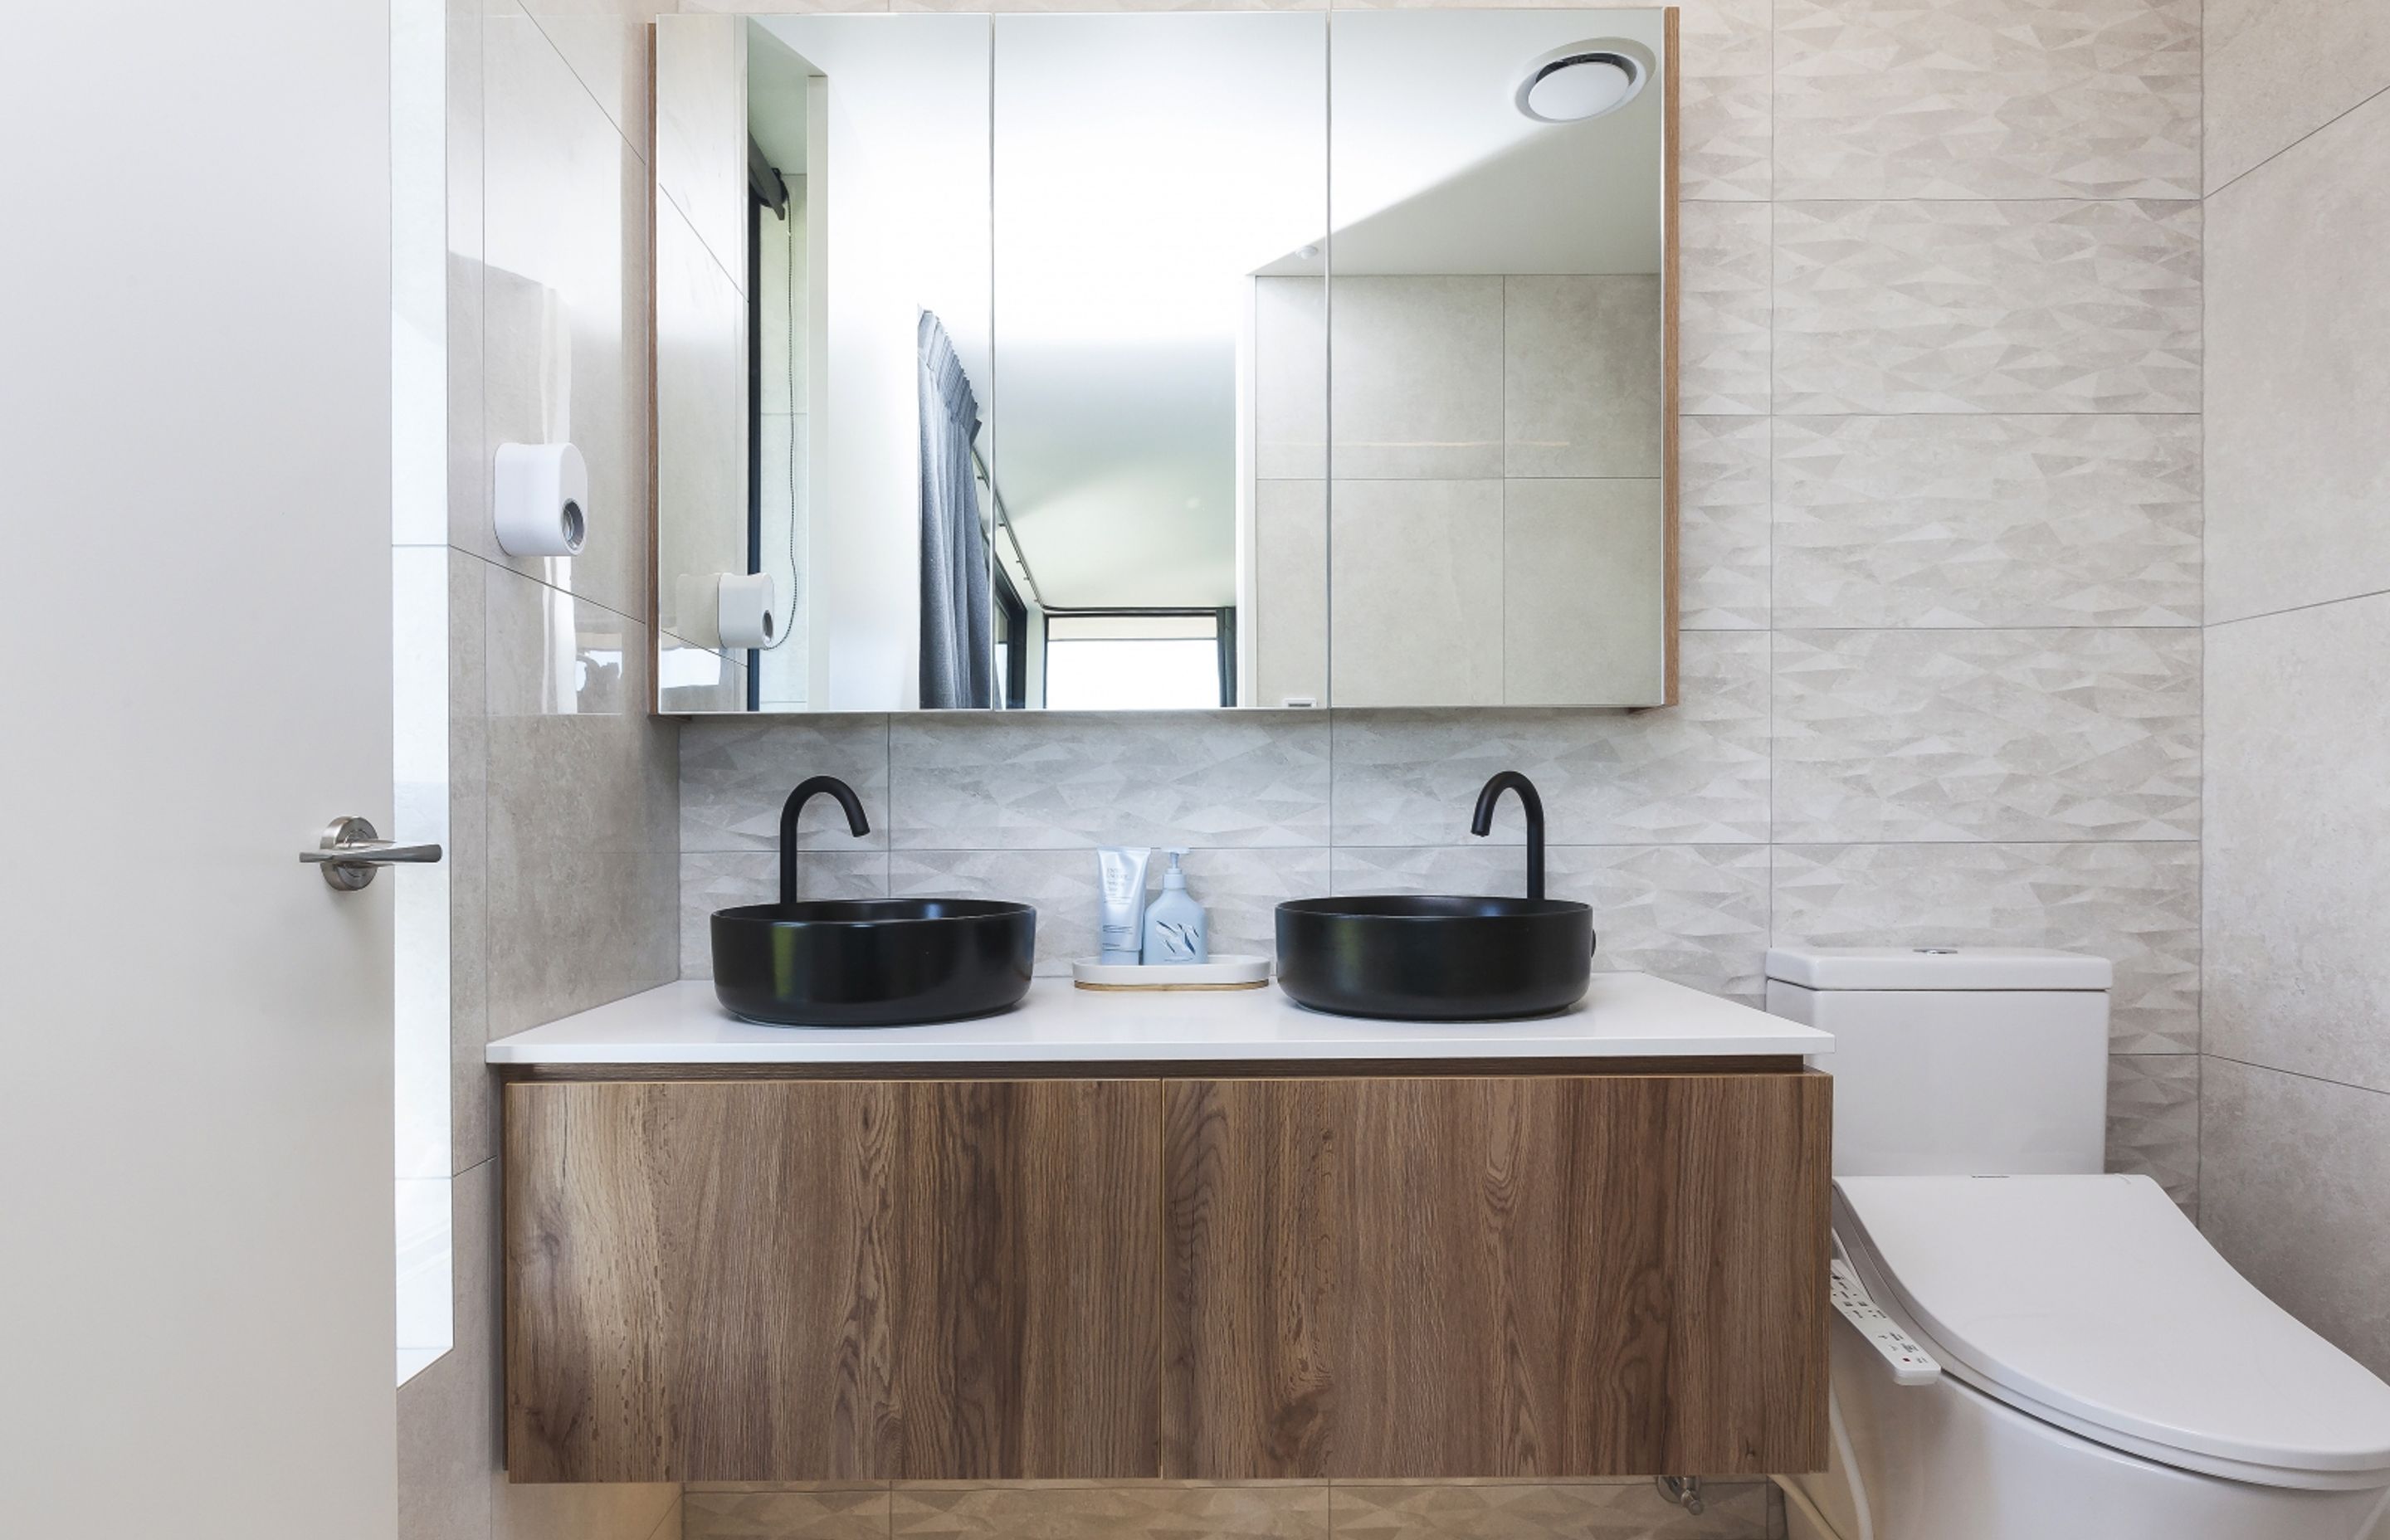 Texture and contrast can be found in the main ensuite bathroom, which features design elements from throughout the home.